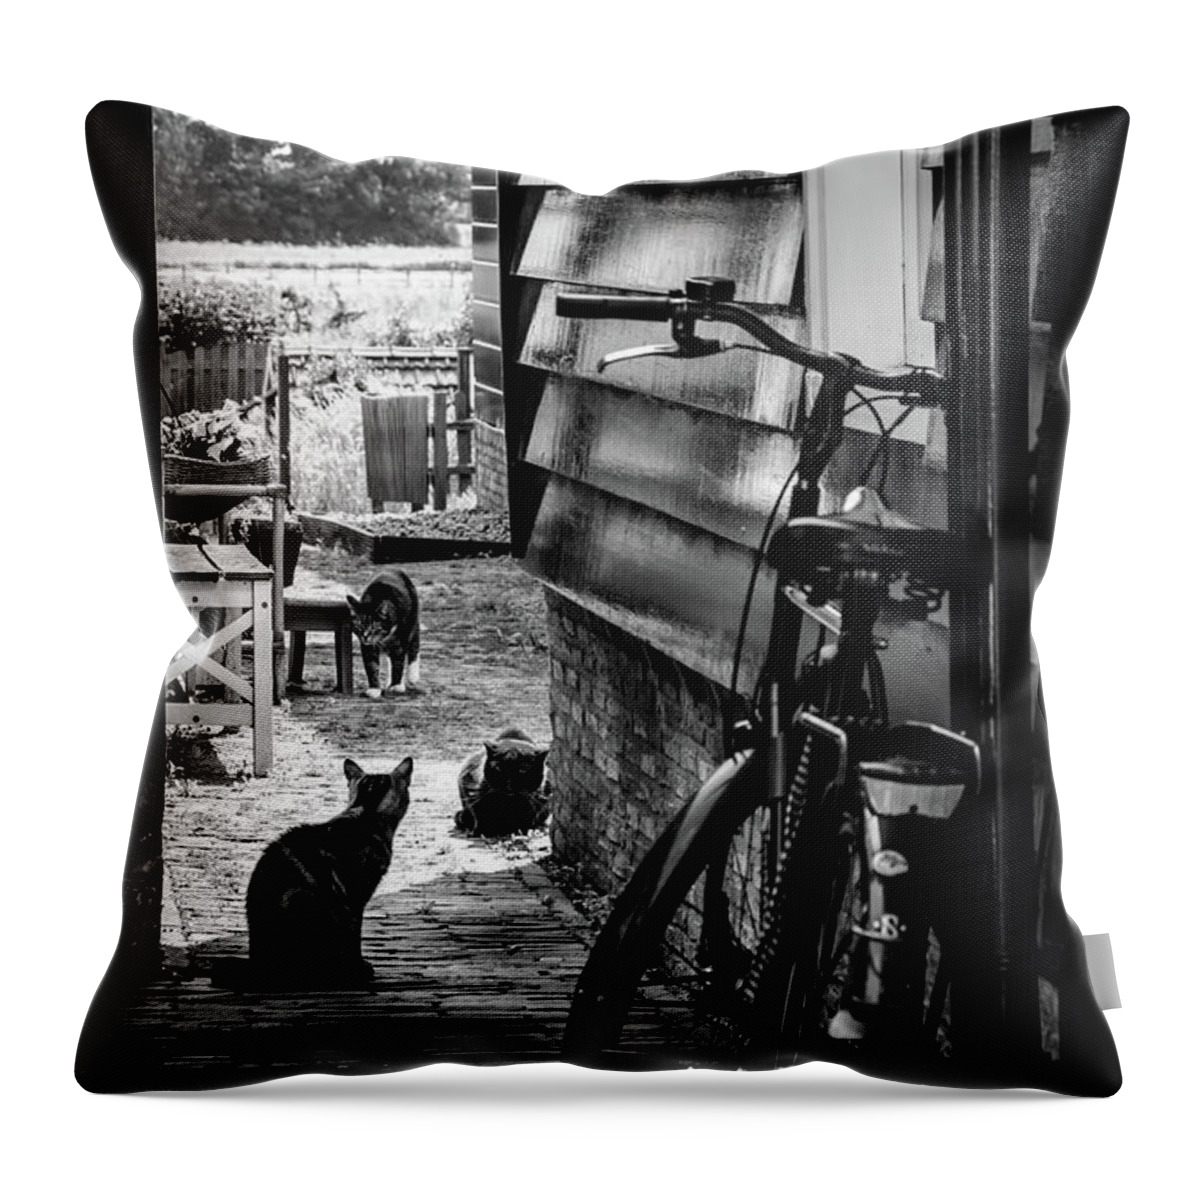 Europe Throw Pillow featuring the photograph A Backstreet With Cats And Bicycle In Marken B/W by RicardMN Photography